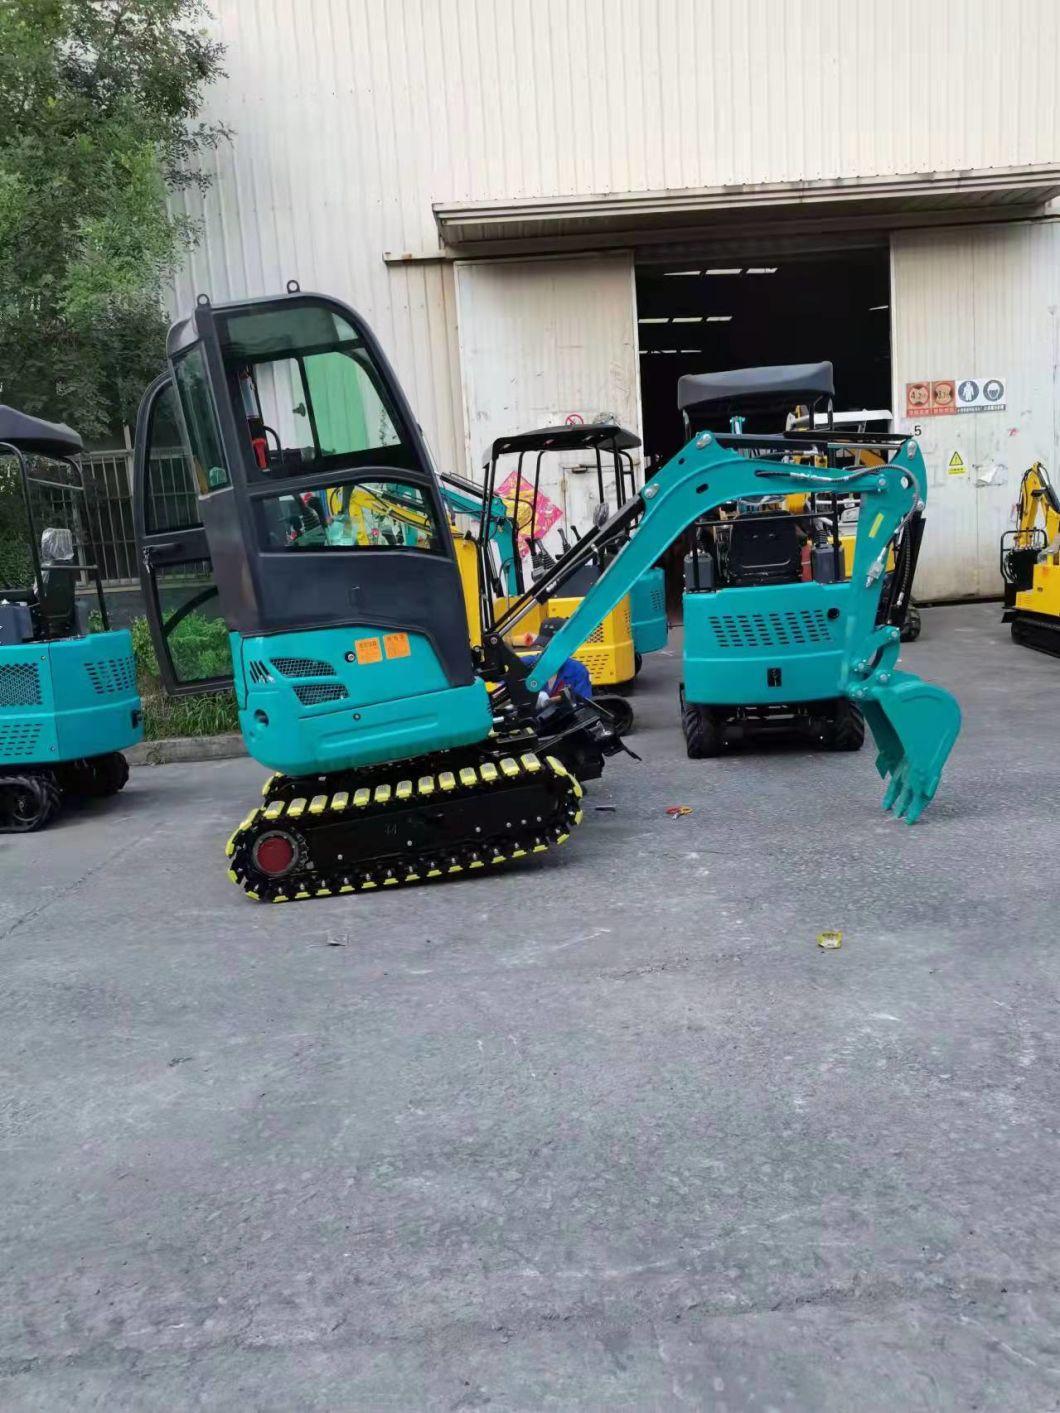 Factory Production of Multi-Functional Hydraulic Crawler Small Excavator